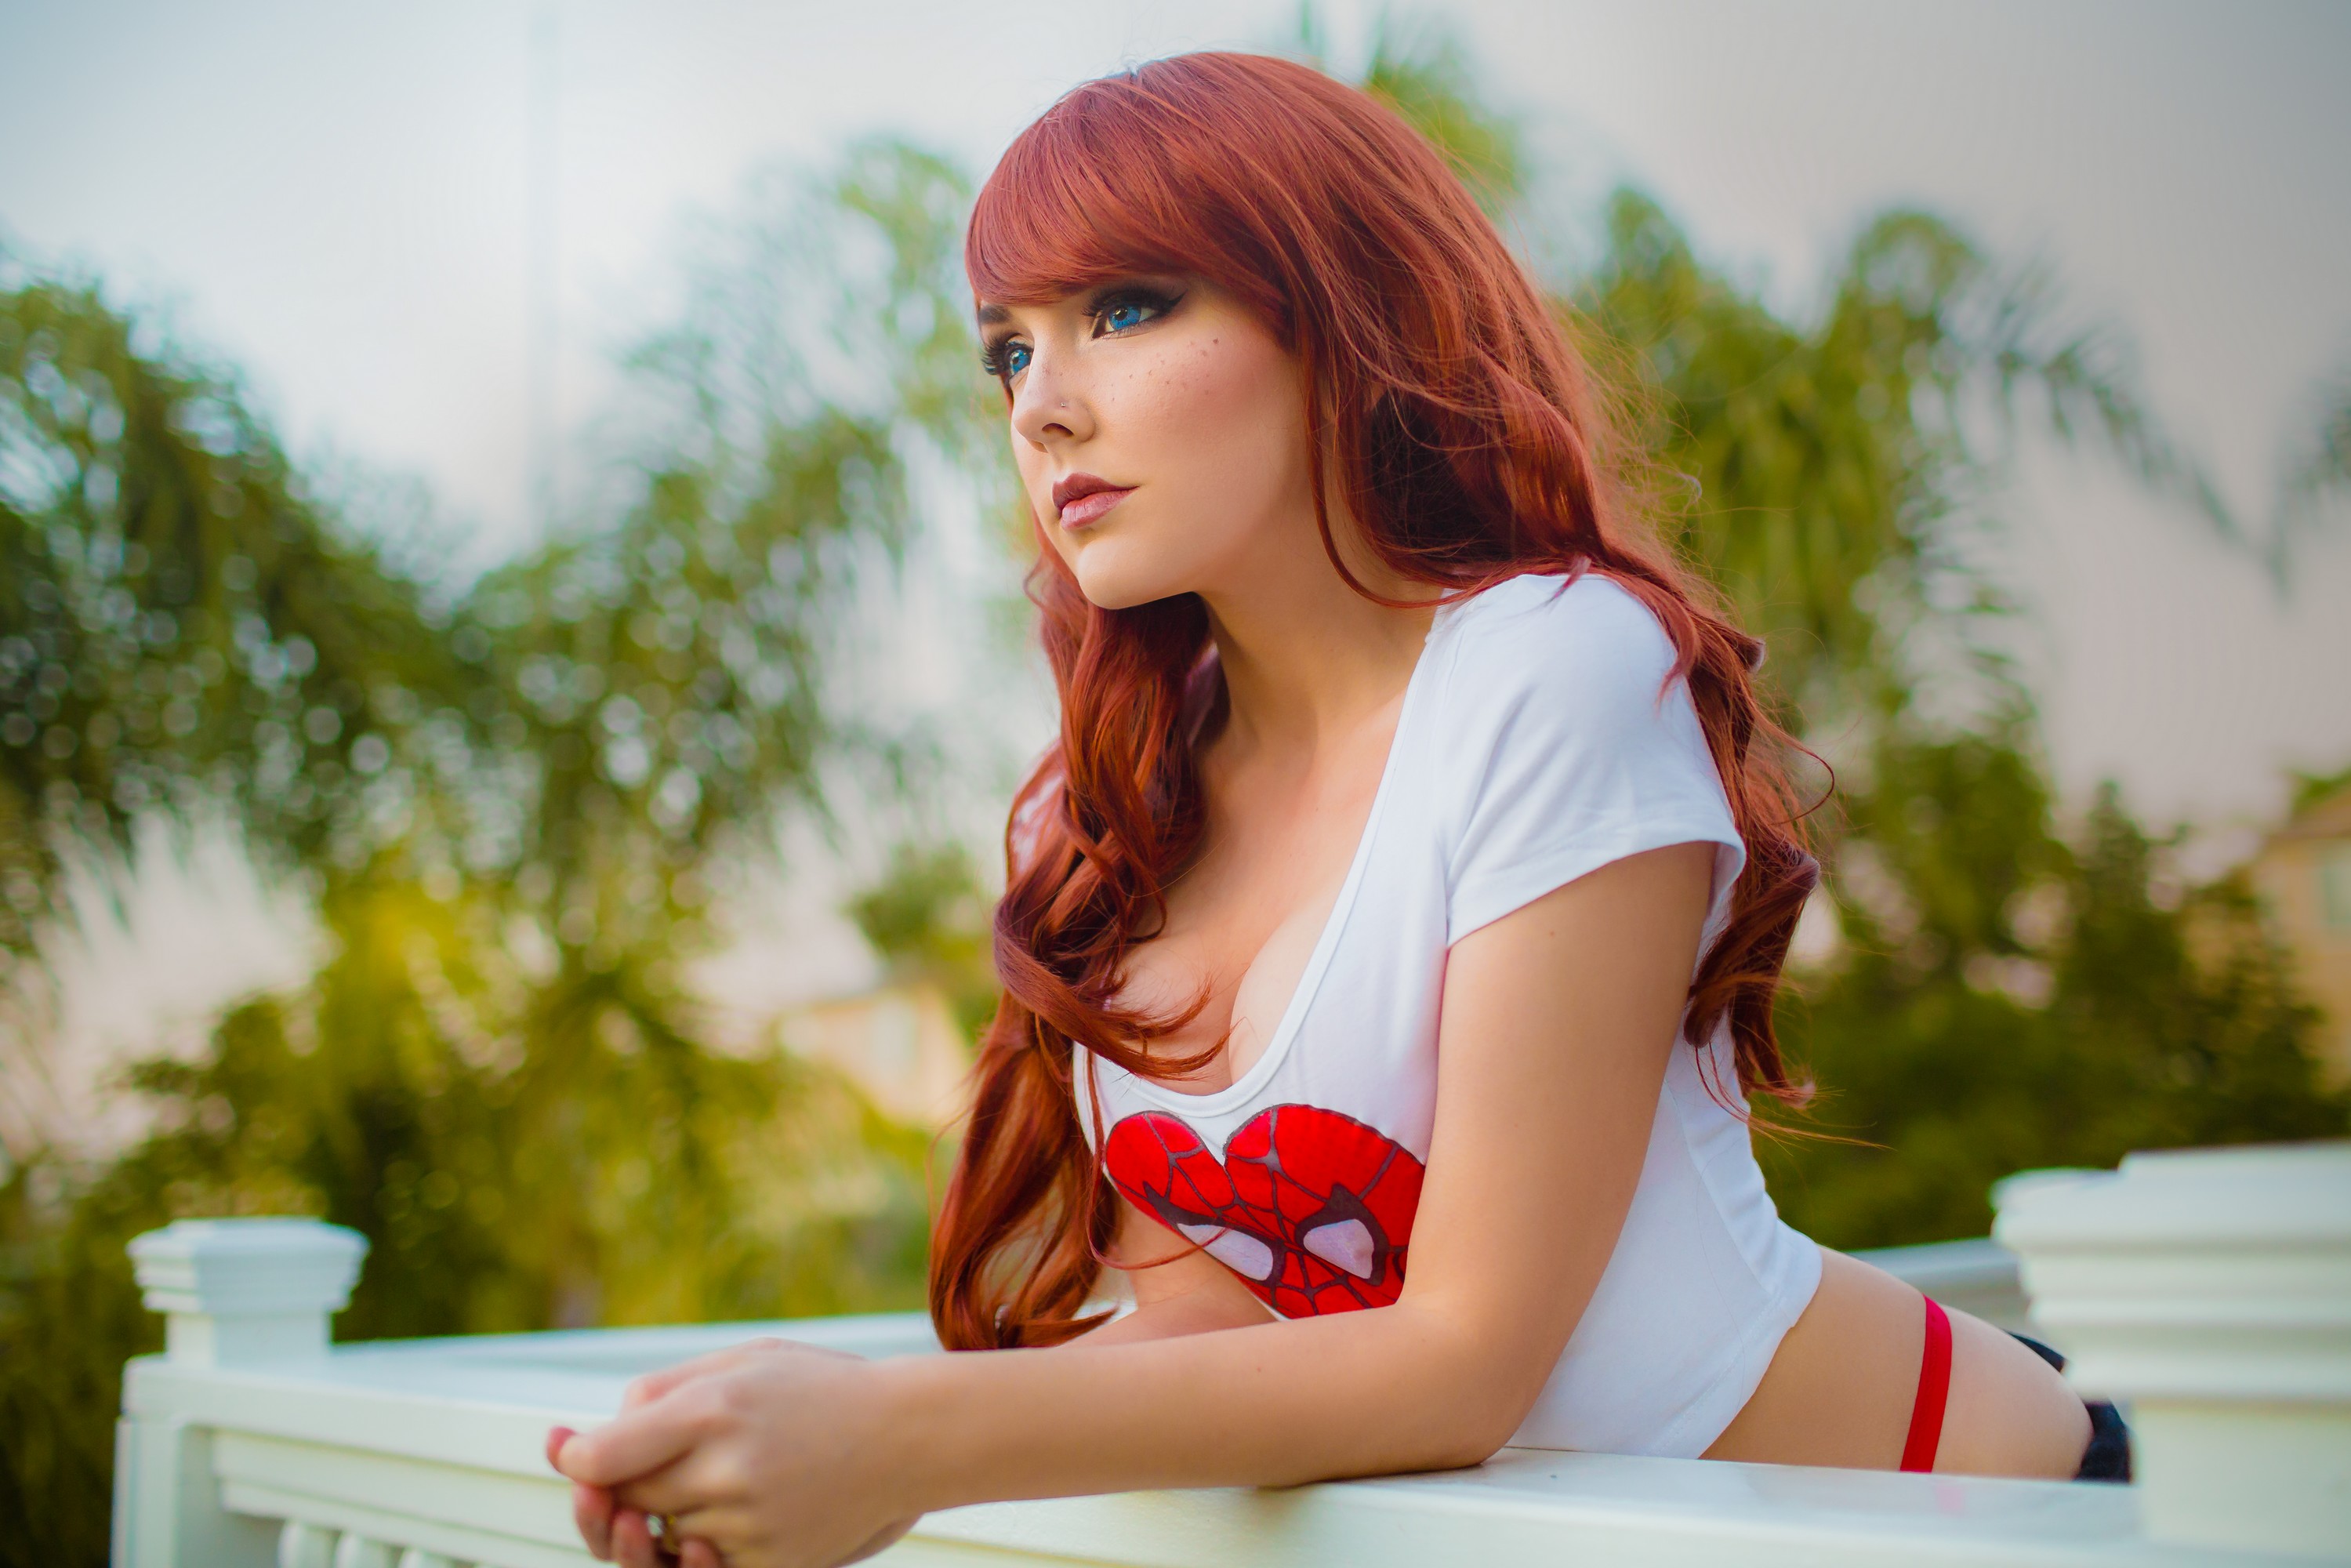 People 2999x2000 Darshelle Stevens cosplay redhead curvy blue eyes women white t-shirt cleavage model Spider-Man closed mouth Mary Jane Watson